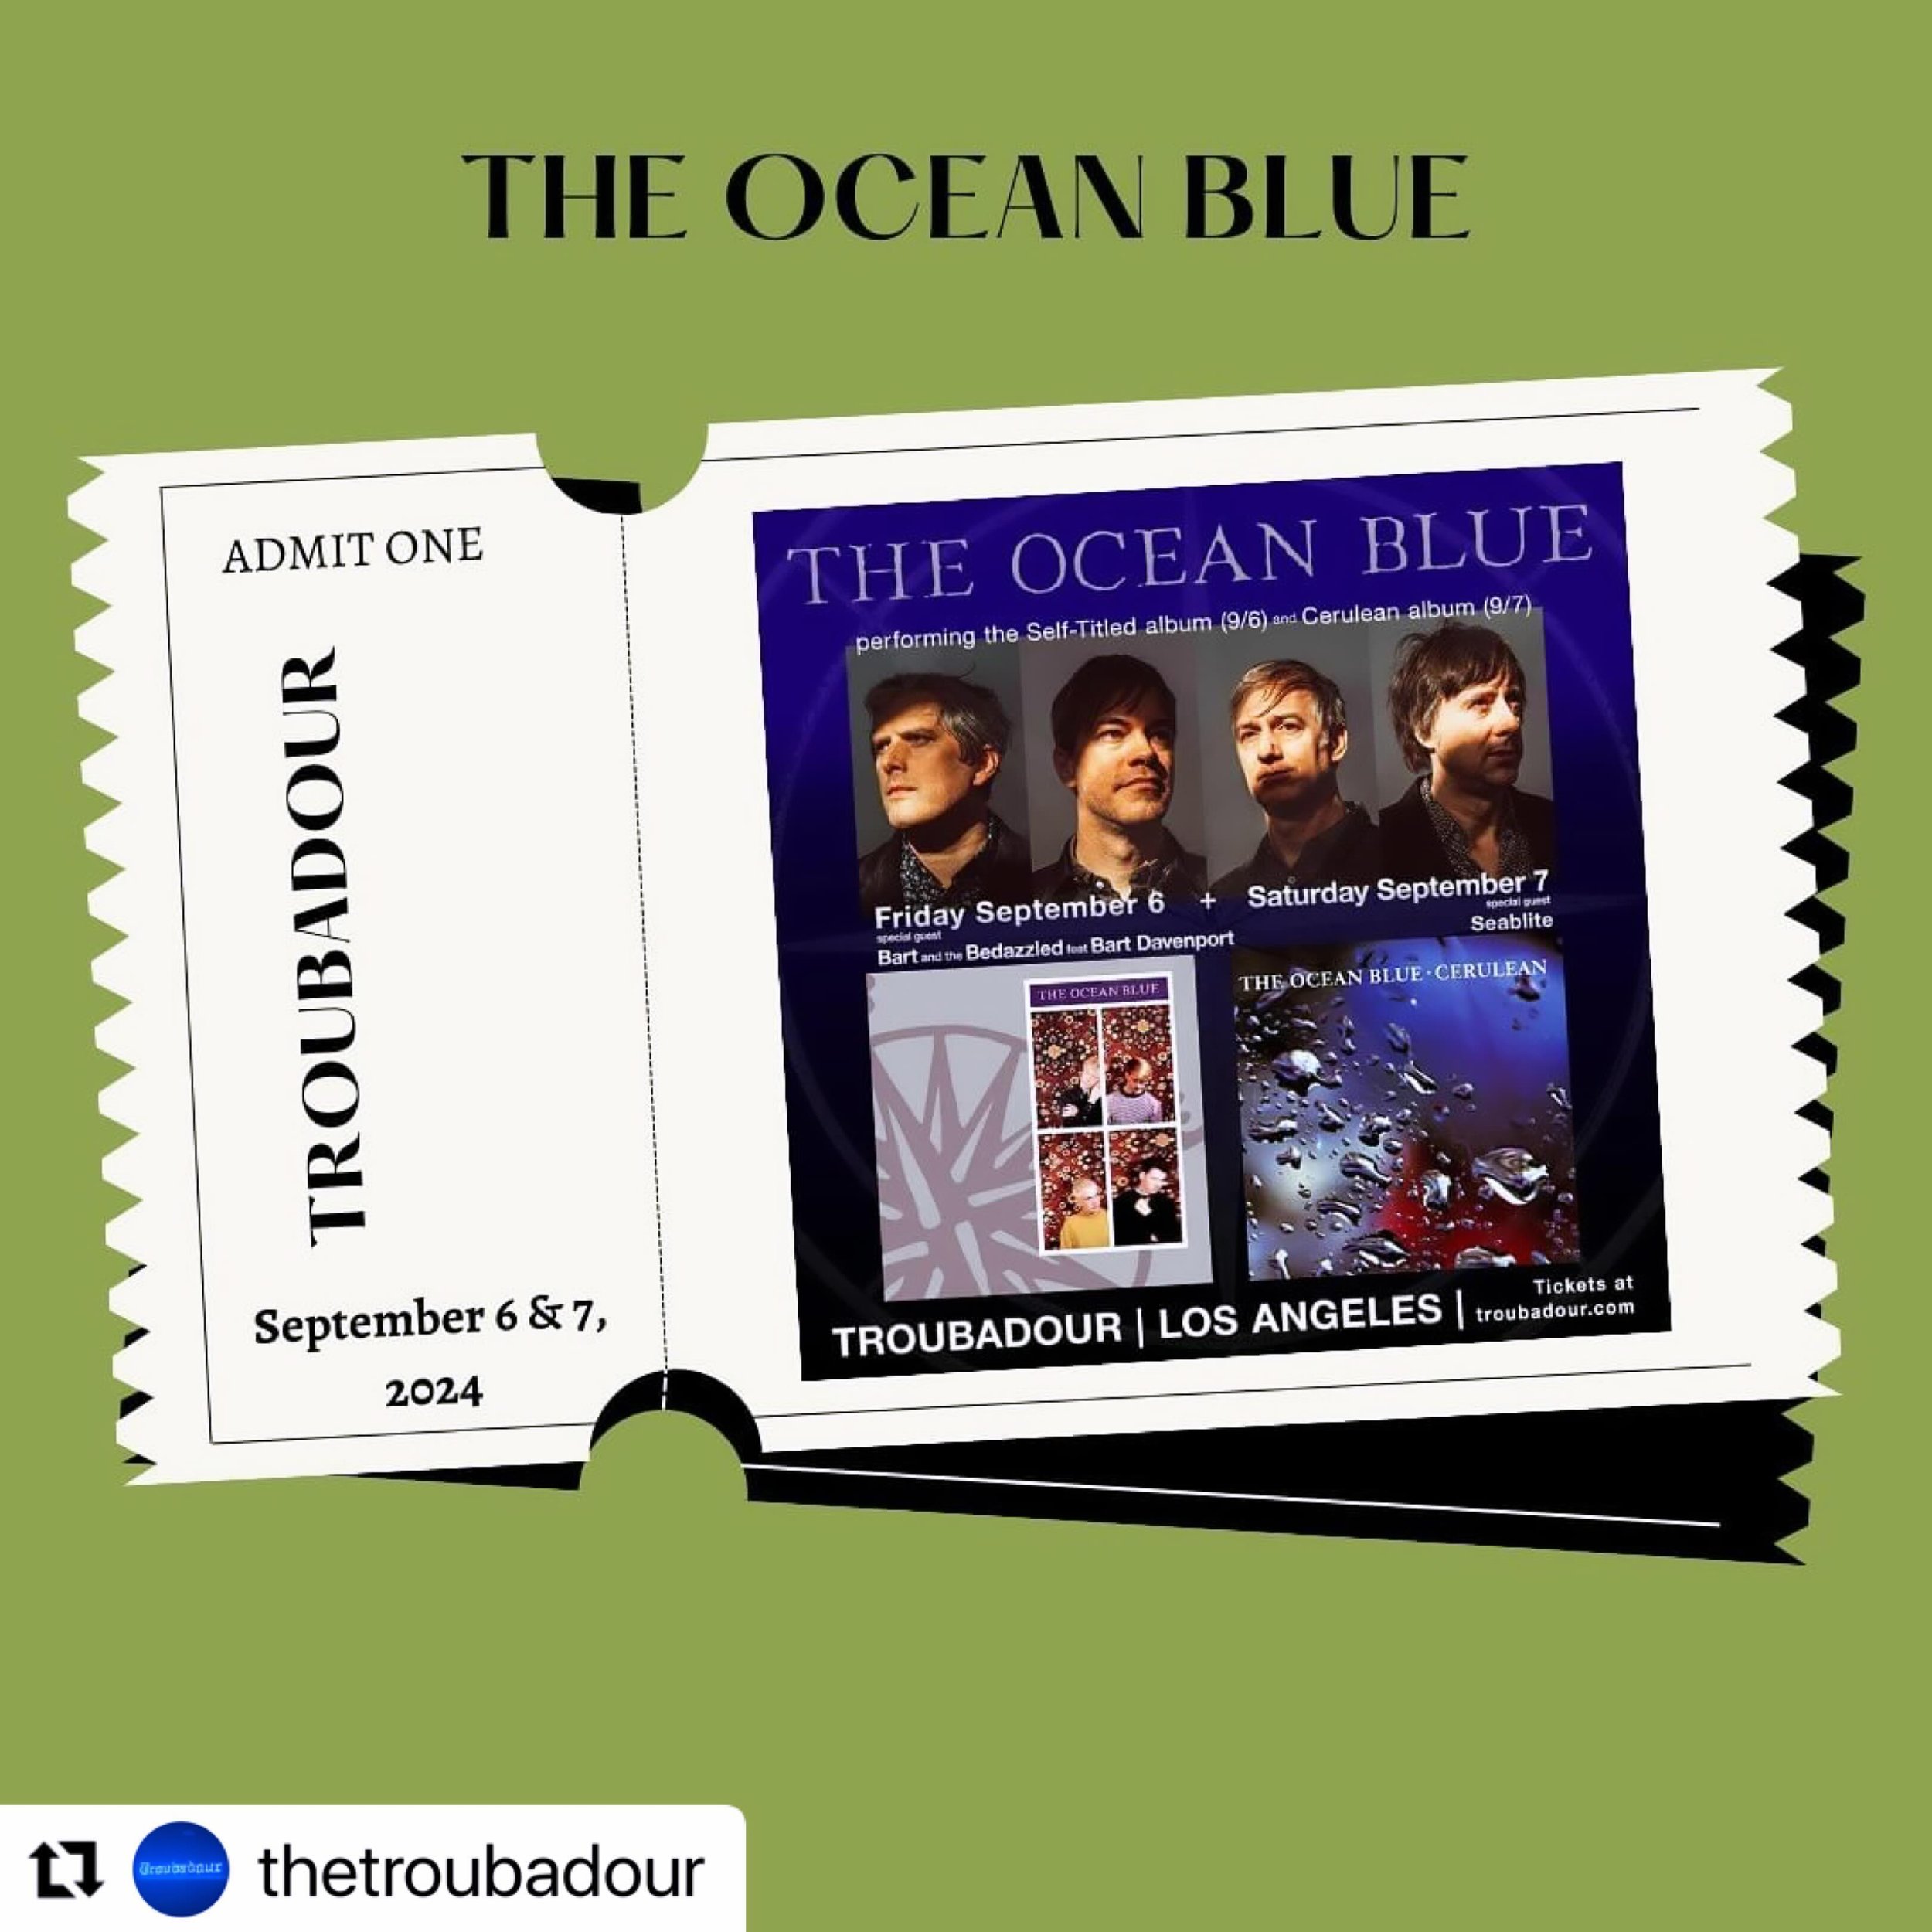 #Repost @thetroubadour 
・・・
Here to save you from FOMO! Tickets for these shows are almost gone! 💨 

9/06: @theoceanblue 
9/07: @theoceanblue 

Limited tickets available at troubadour.com! 🎫